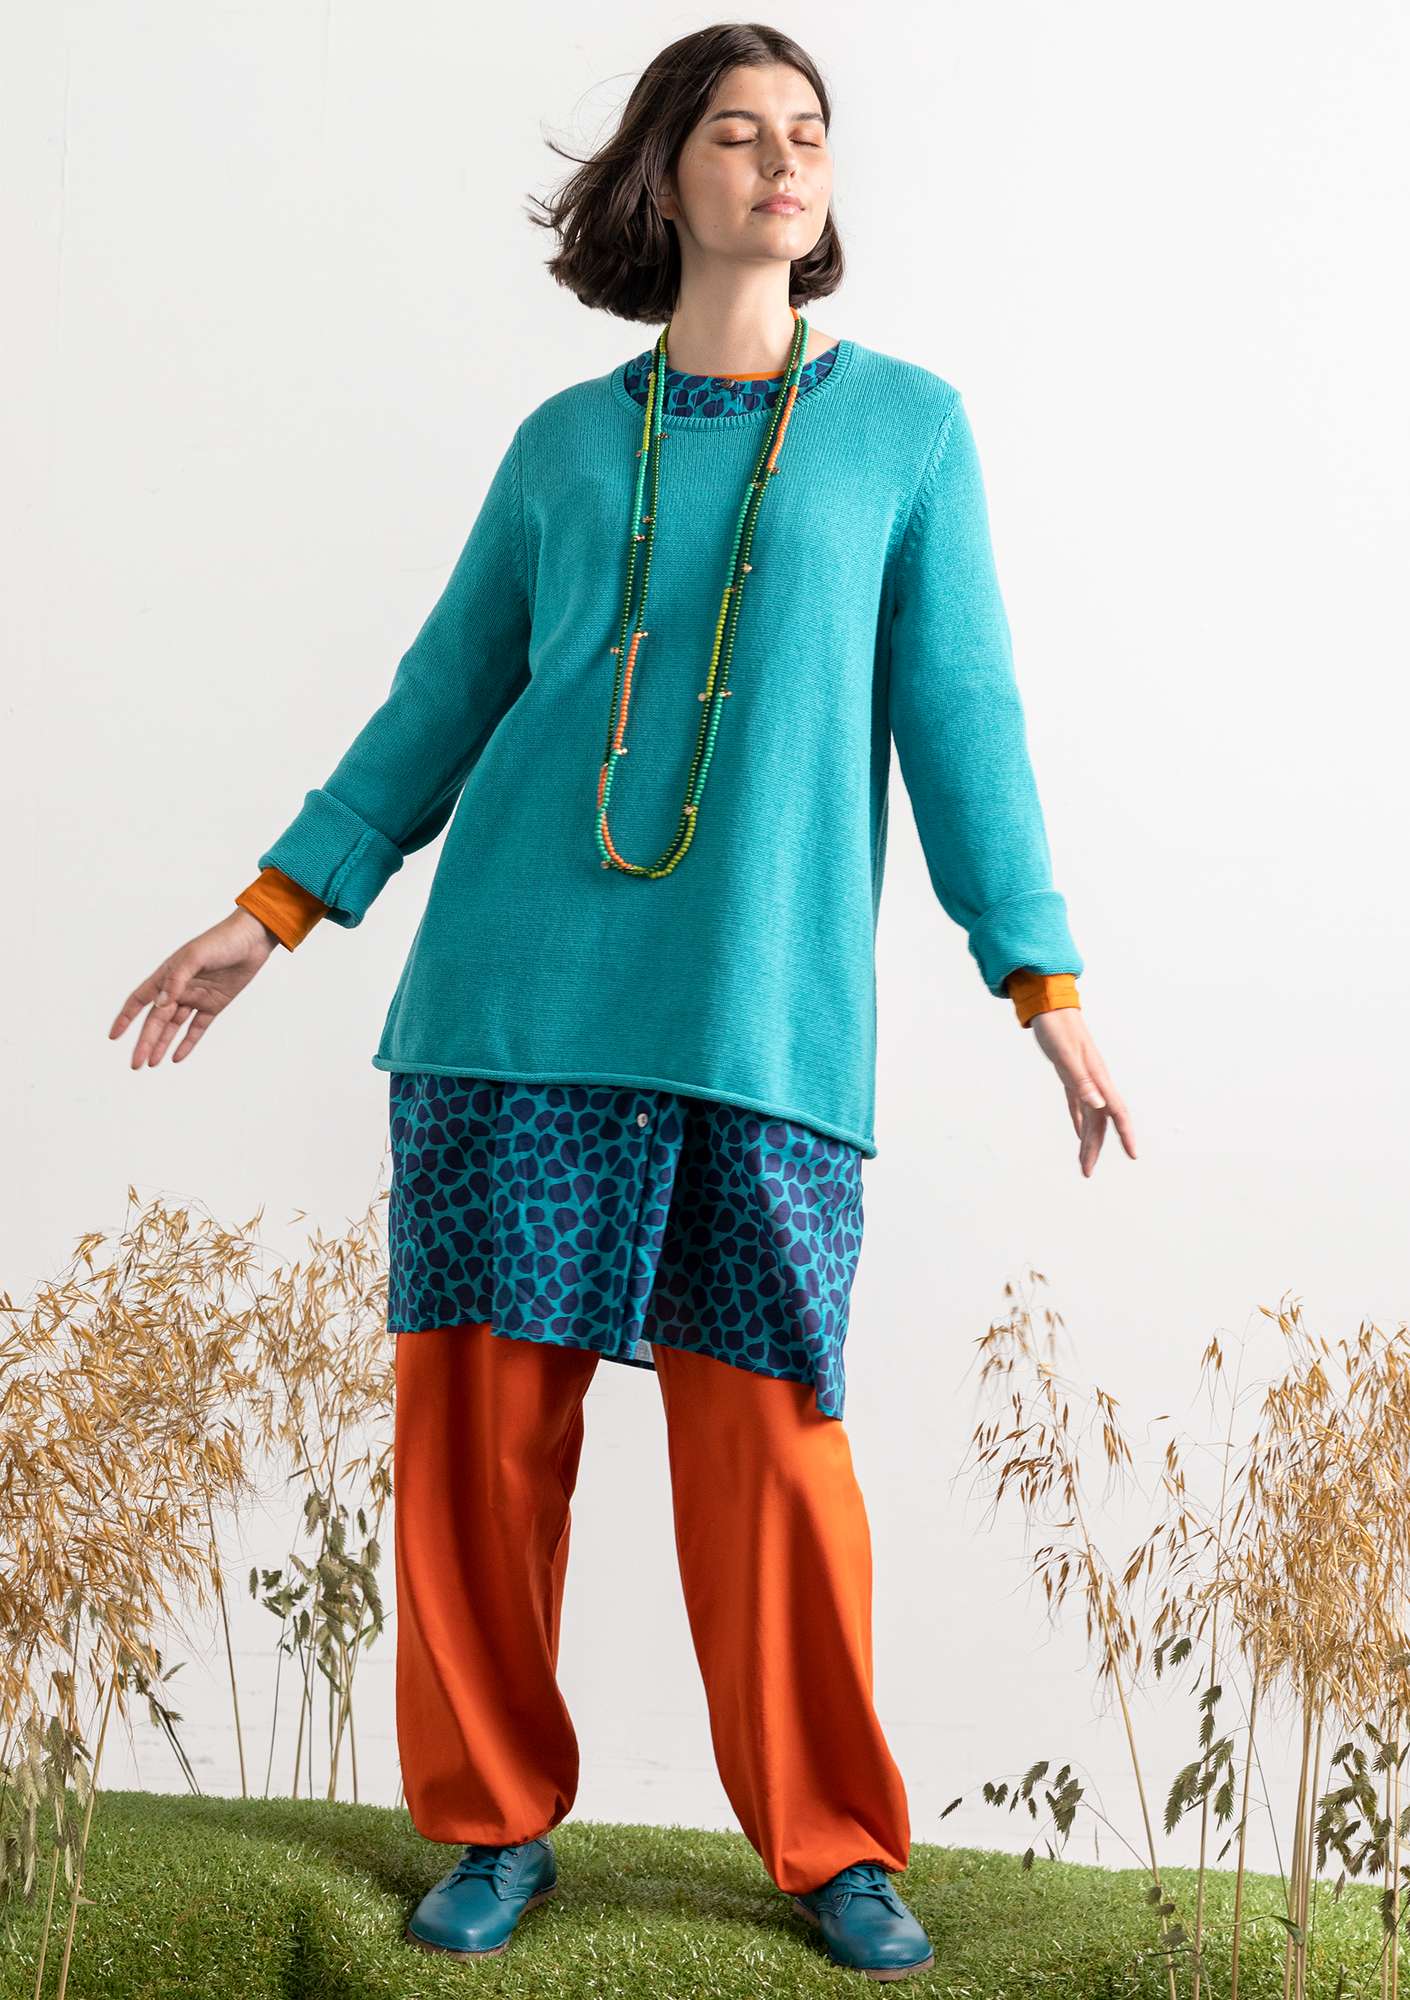 “Adena” BÄSTIS sweater in recycled cotton turquoise